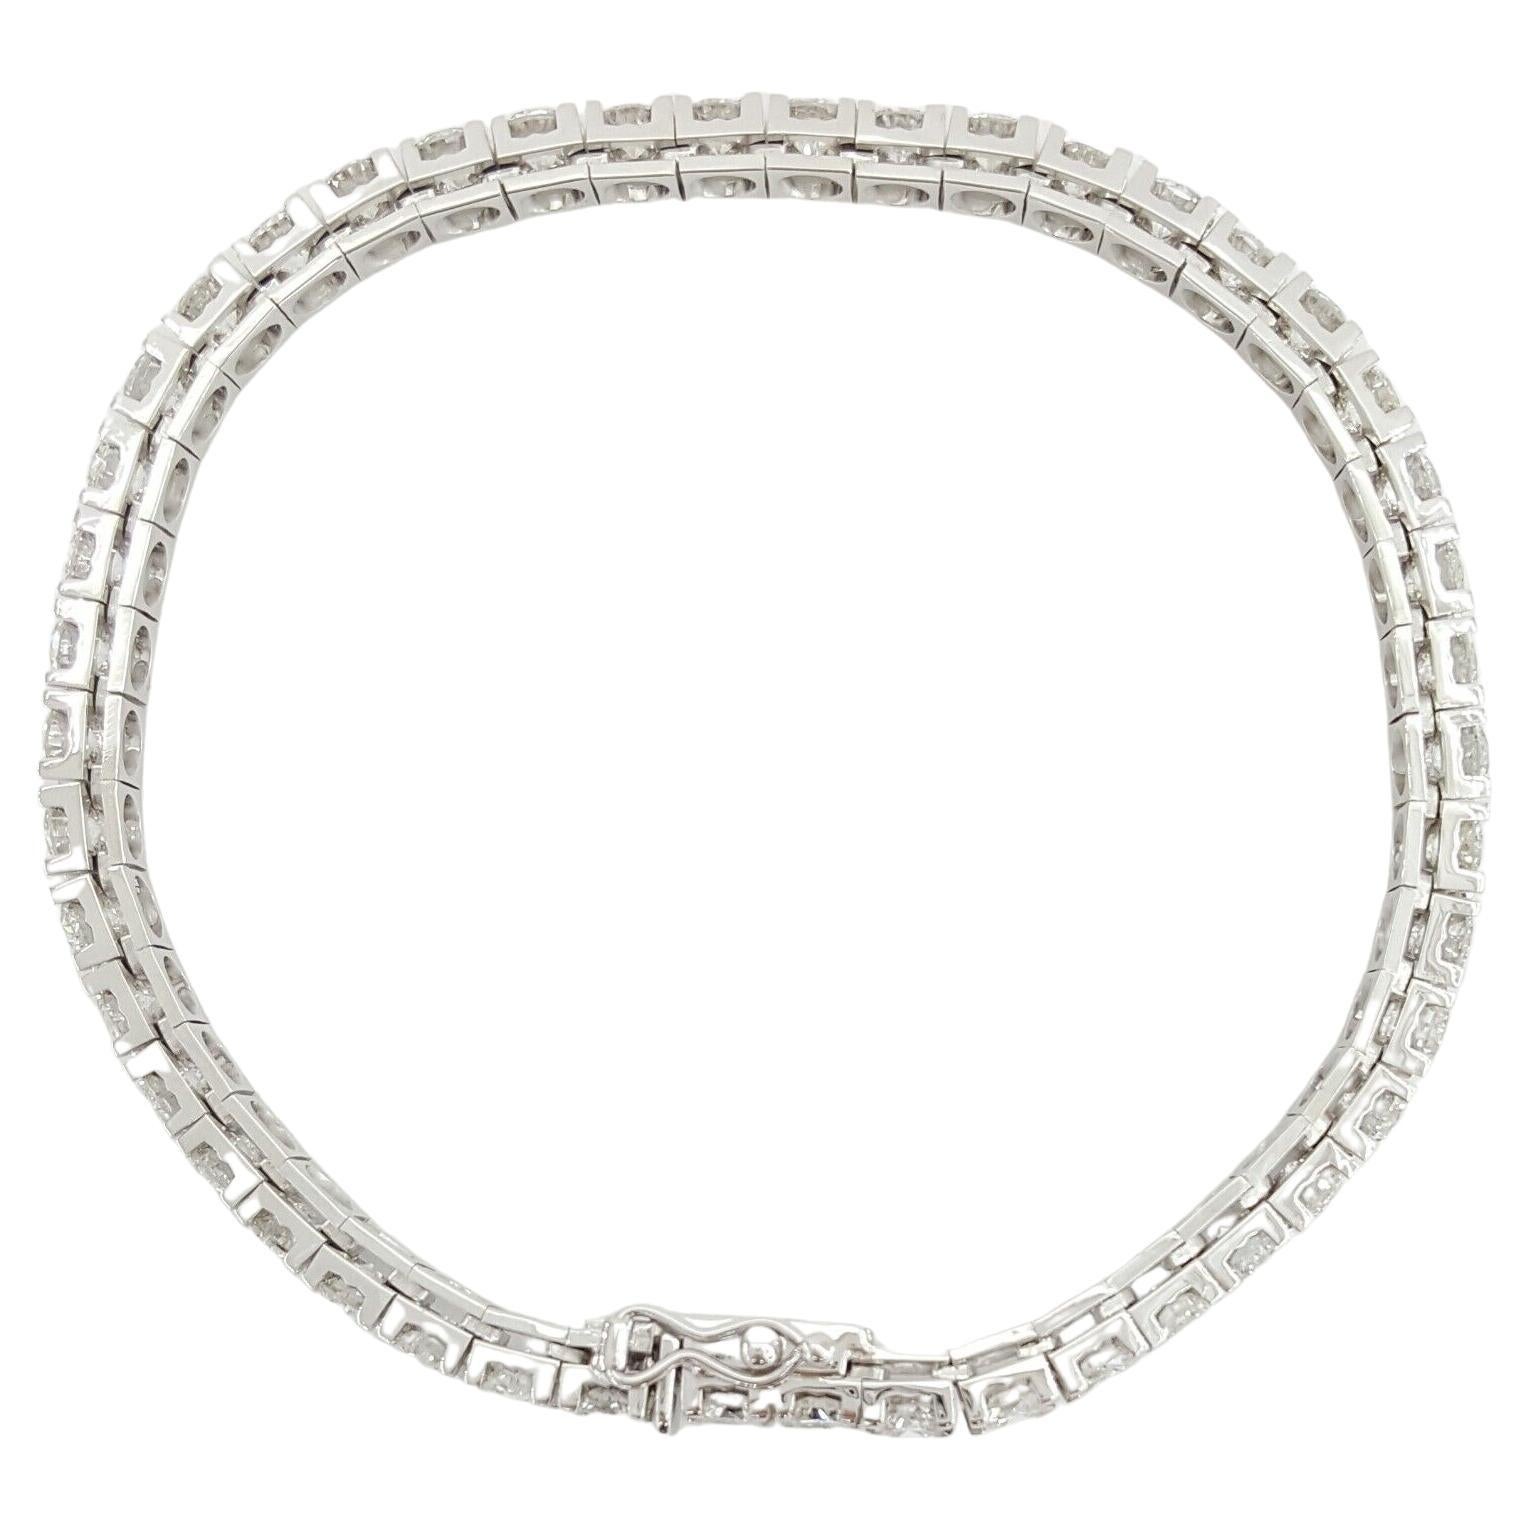 Indulge in the timeless elegance of this Round Brilliant Cut Diamond Straight Line Tennis Bracelet, a stunning piece that captures the essence of sophistication. Crafted in exquisite 14K White Gold, this bracelet boasts a total weight of 10.86 ct of